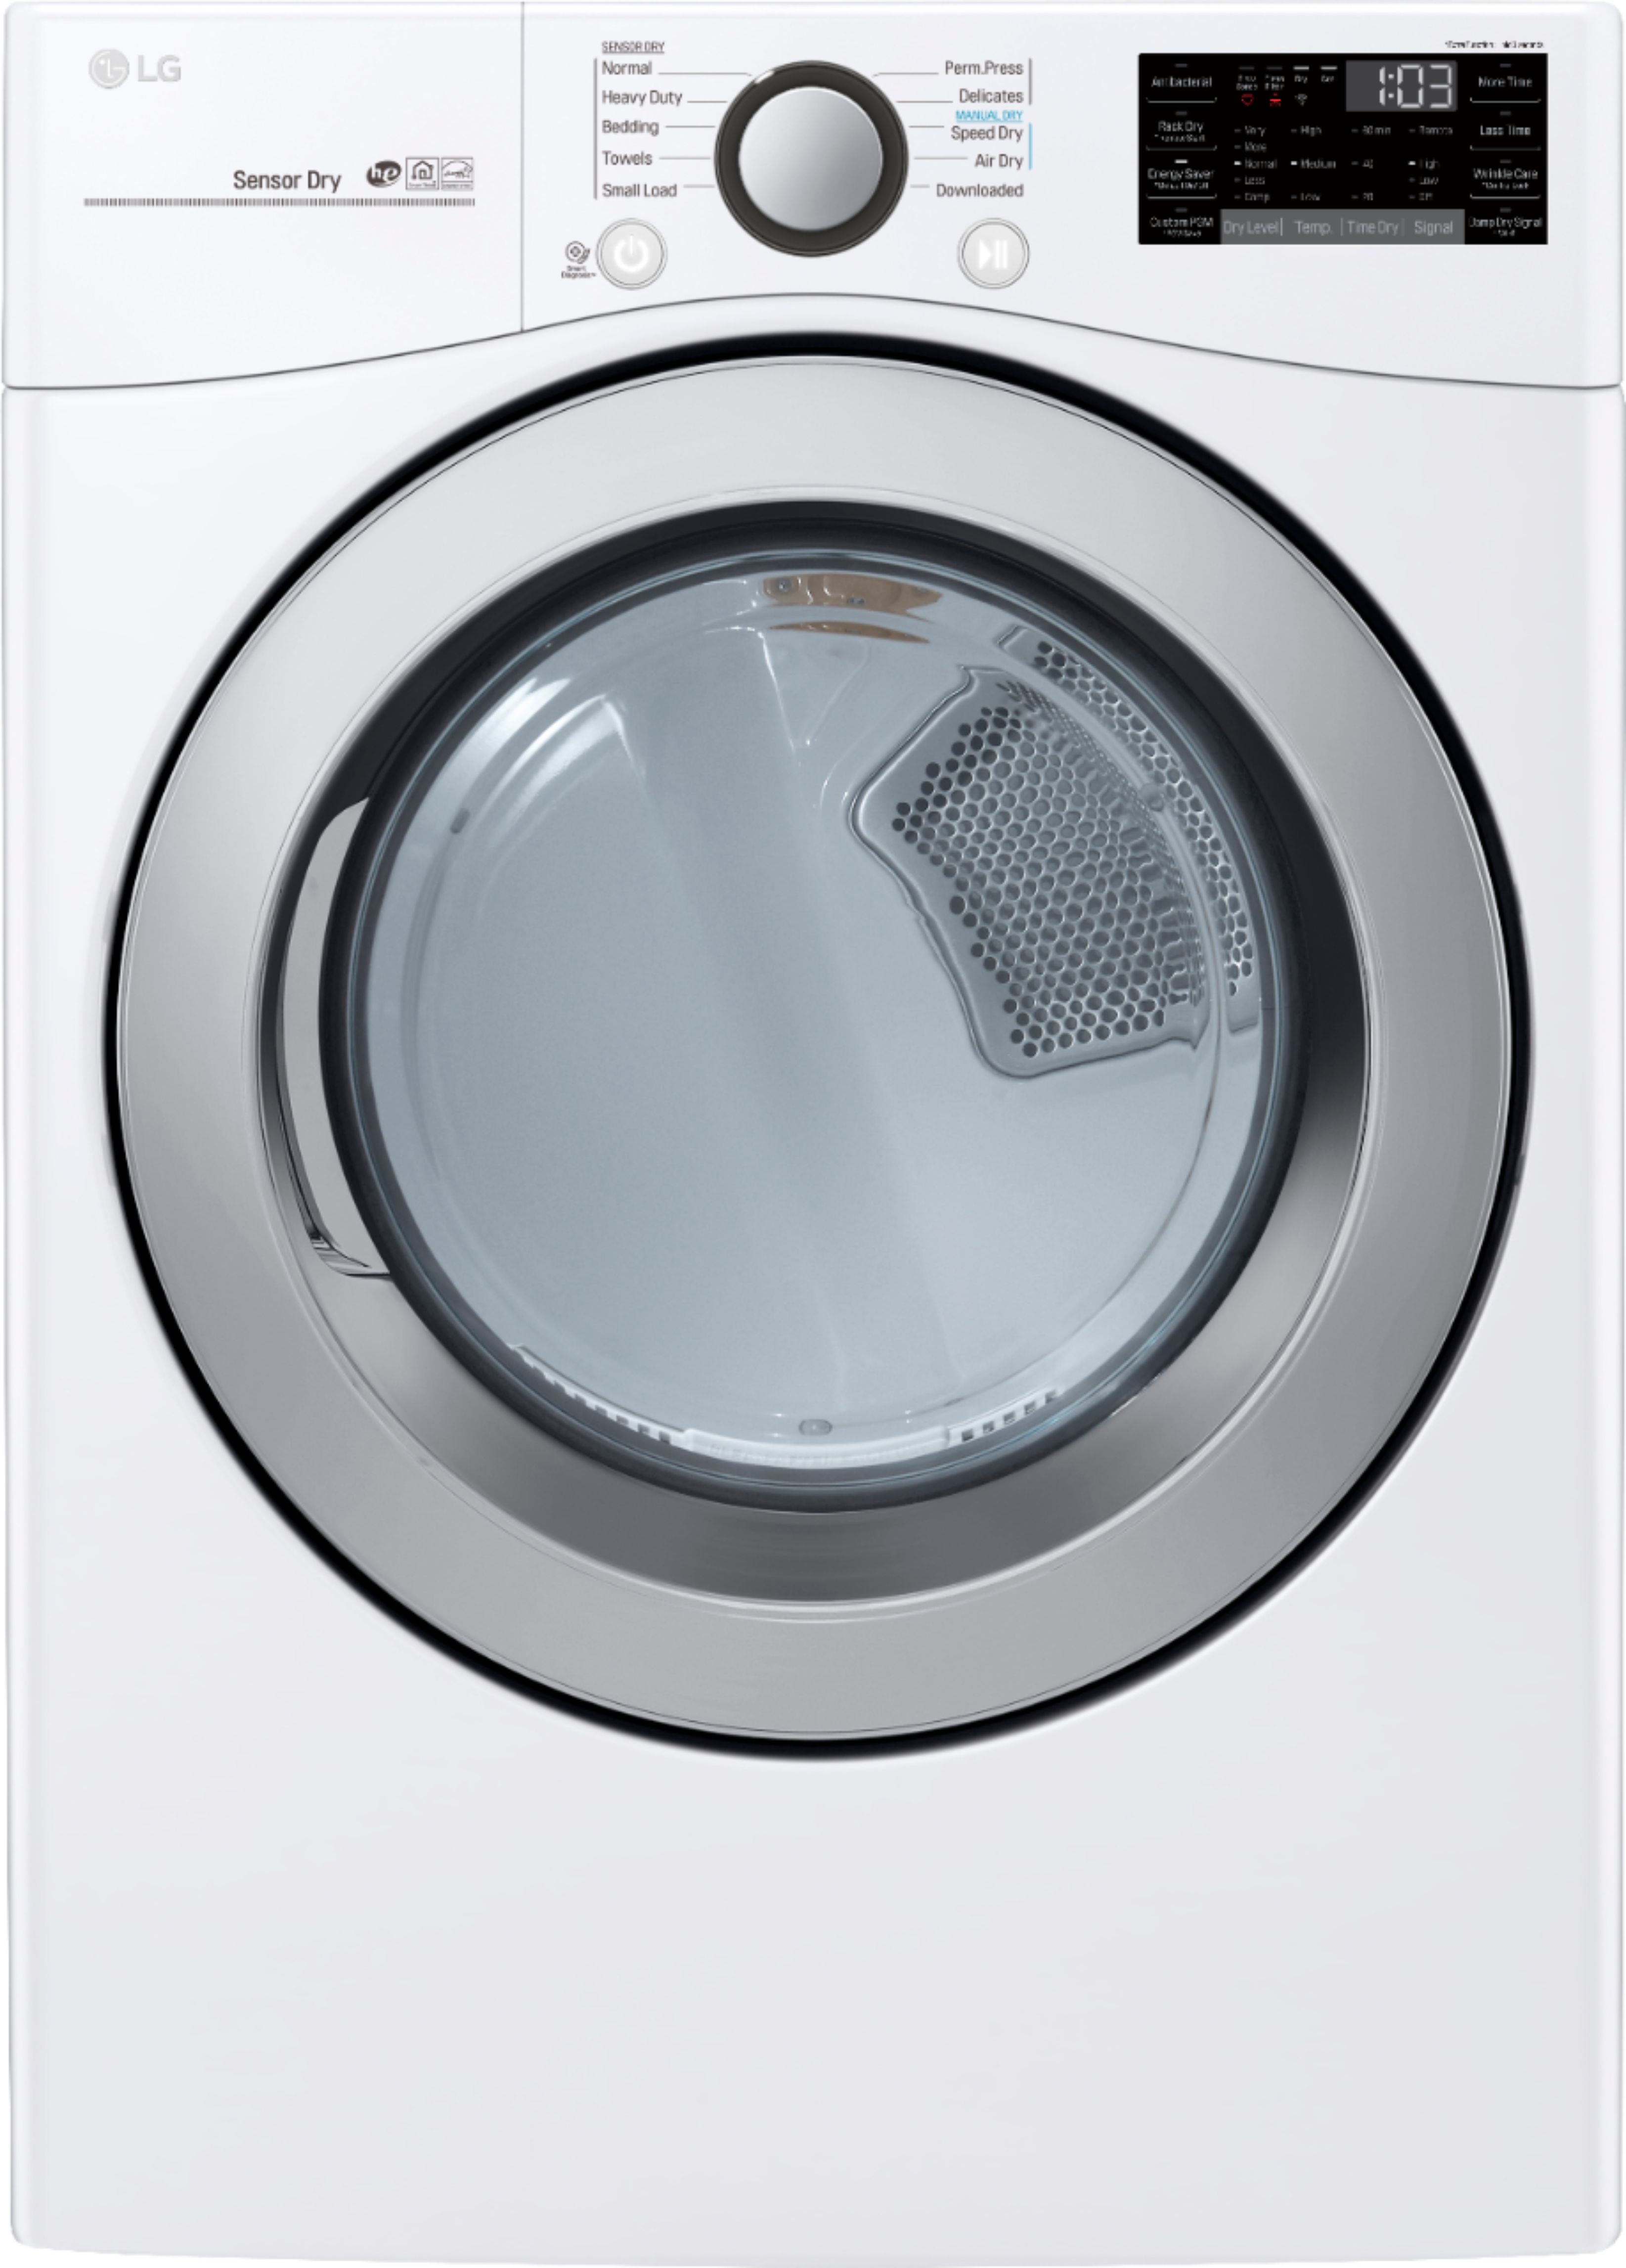 lg-7-4-cu-ft-stackable-smart-electric-dryer-with-sensor-dry-white